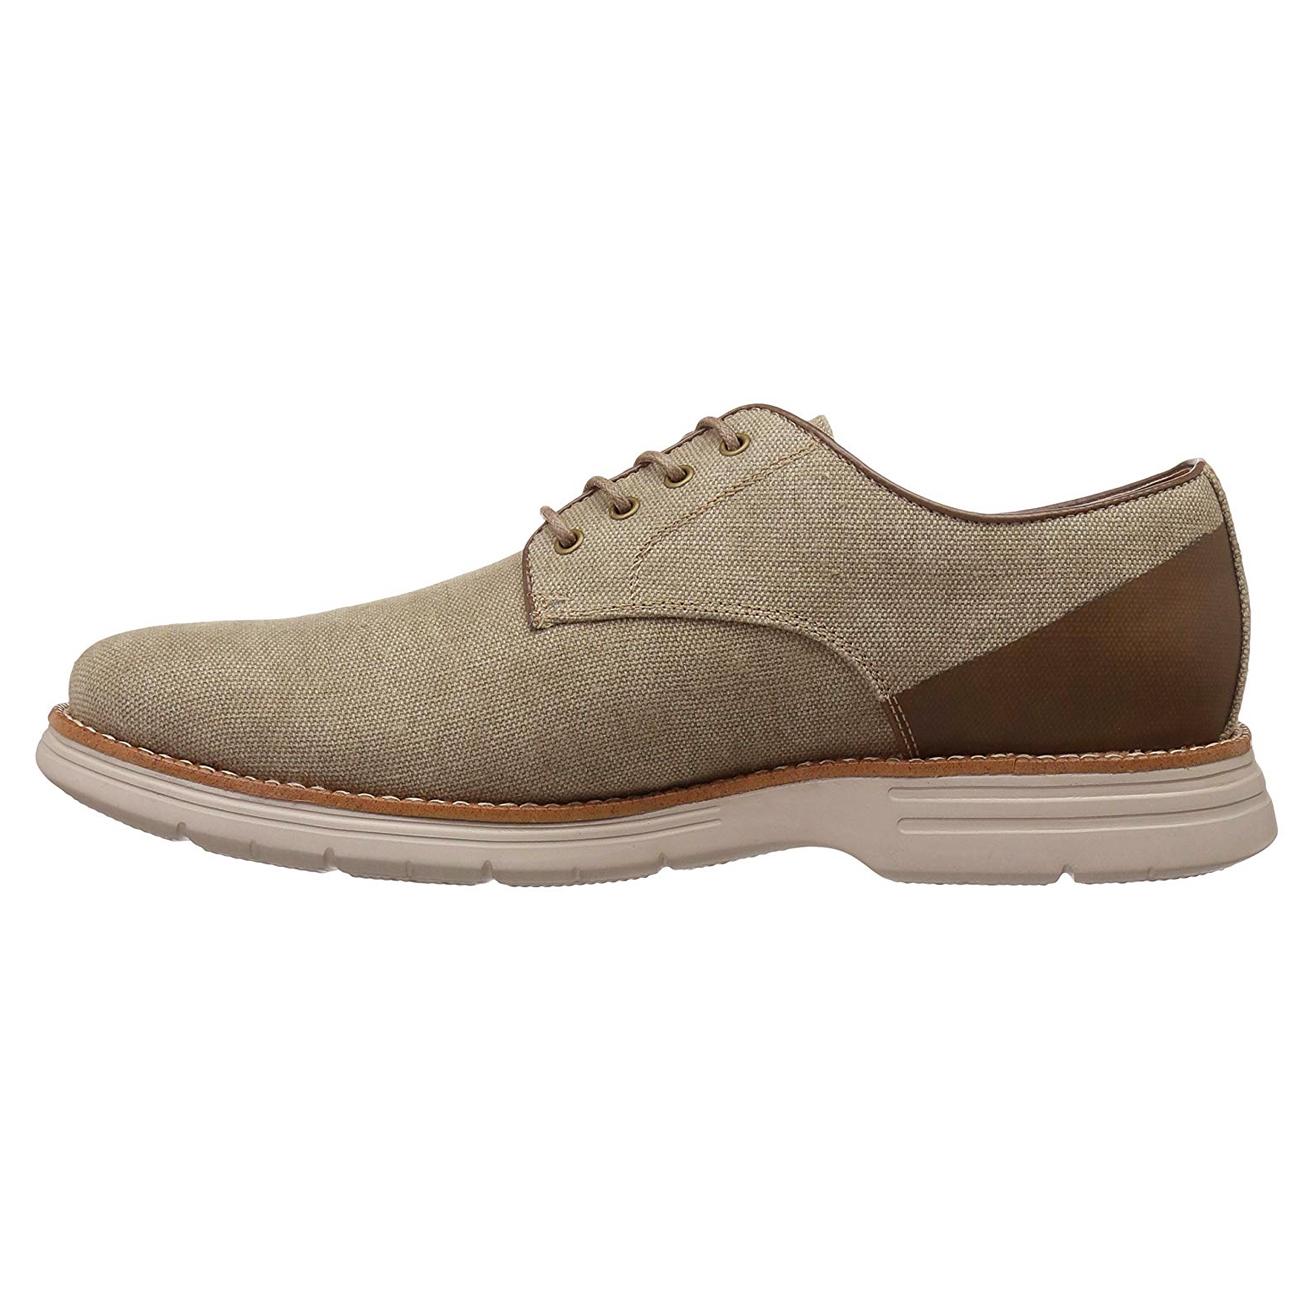 GBX Hammon Taupe / Dark Taupe Woven Canvas Plain Toe Casual Shoes ...